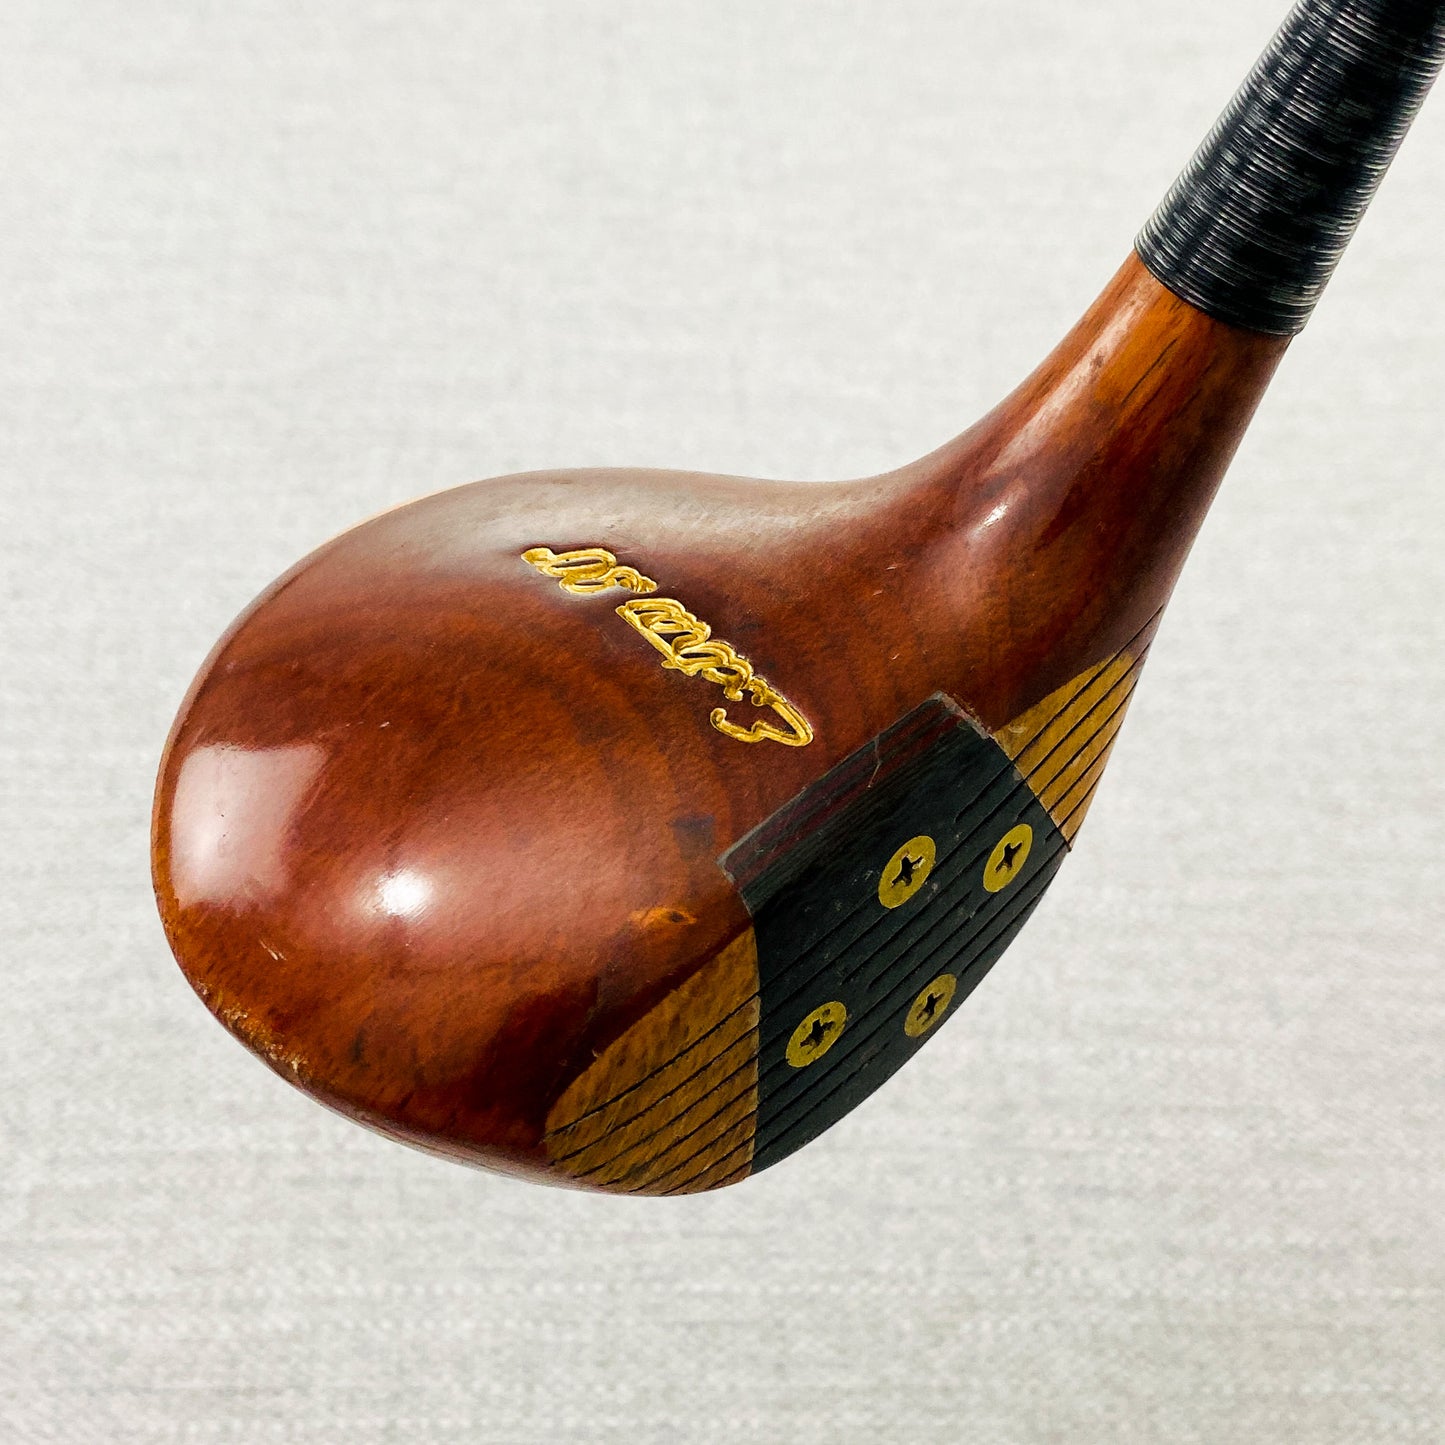 HONMA Extra 90 Ladies Persimmon Driver - Good Condition # 13493